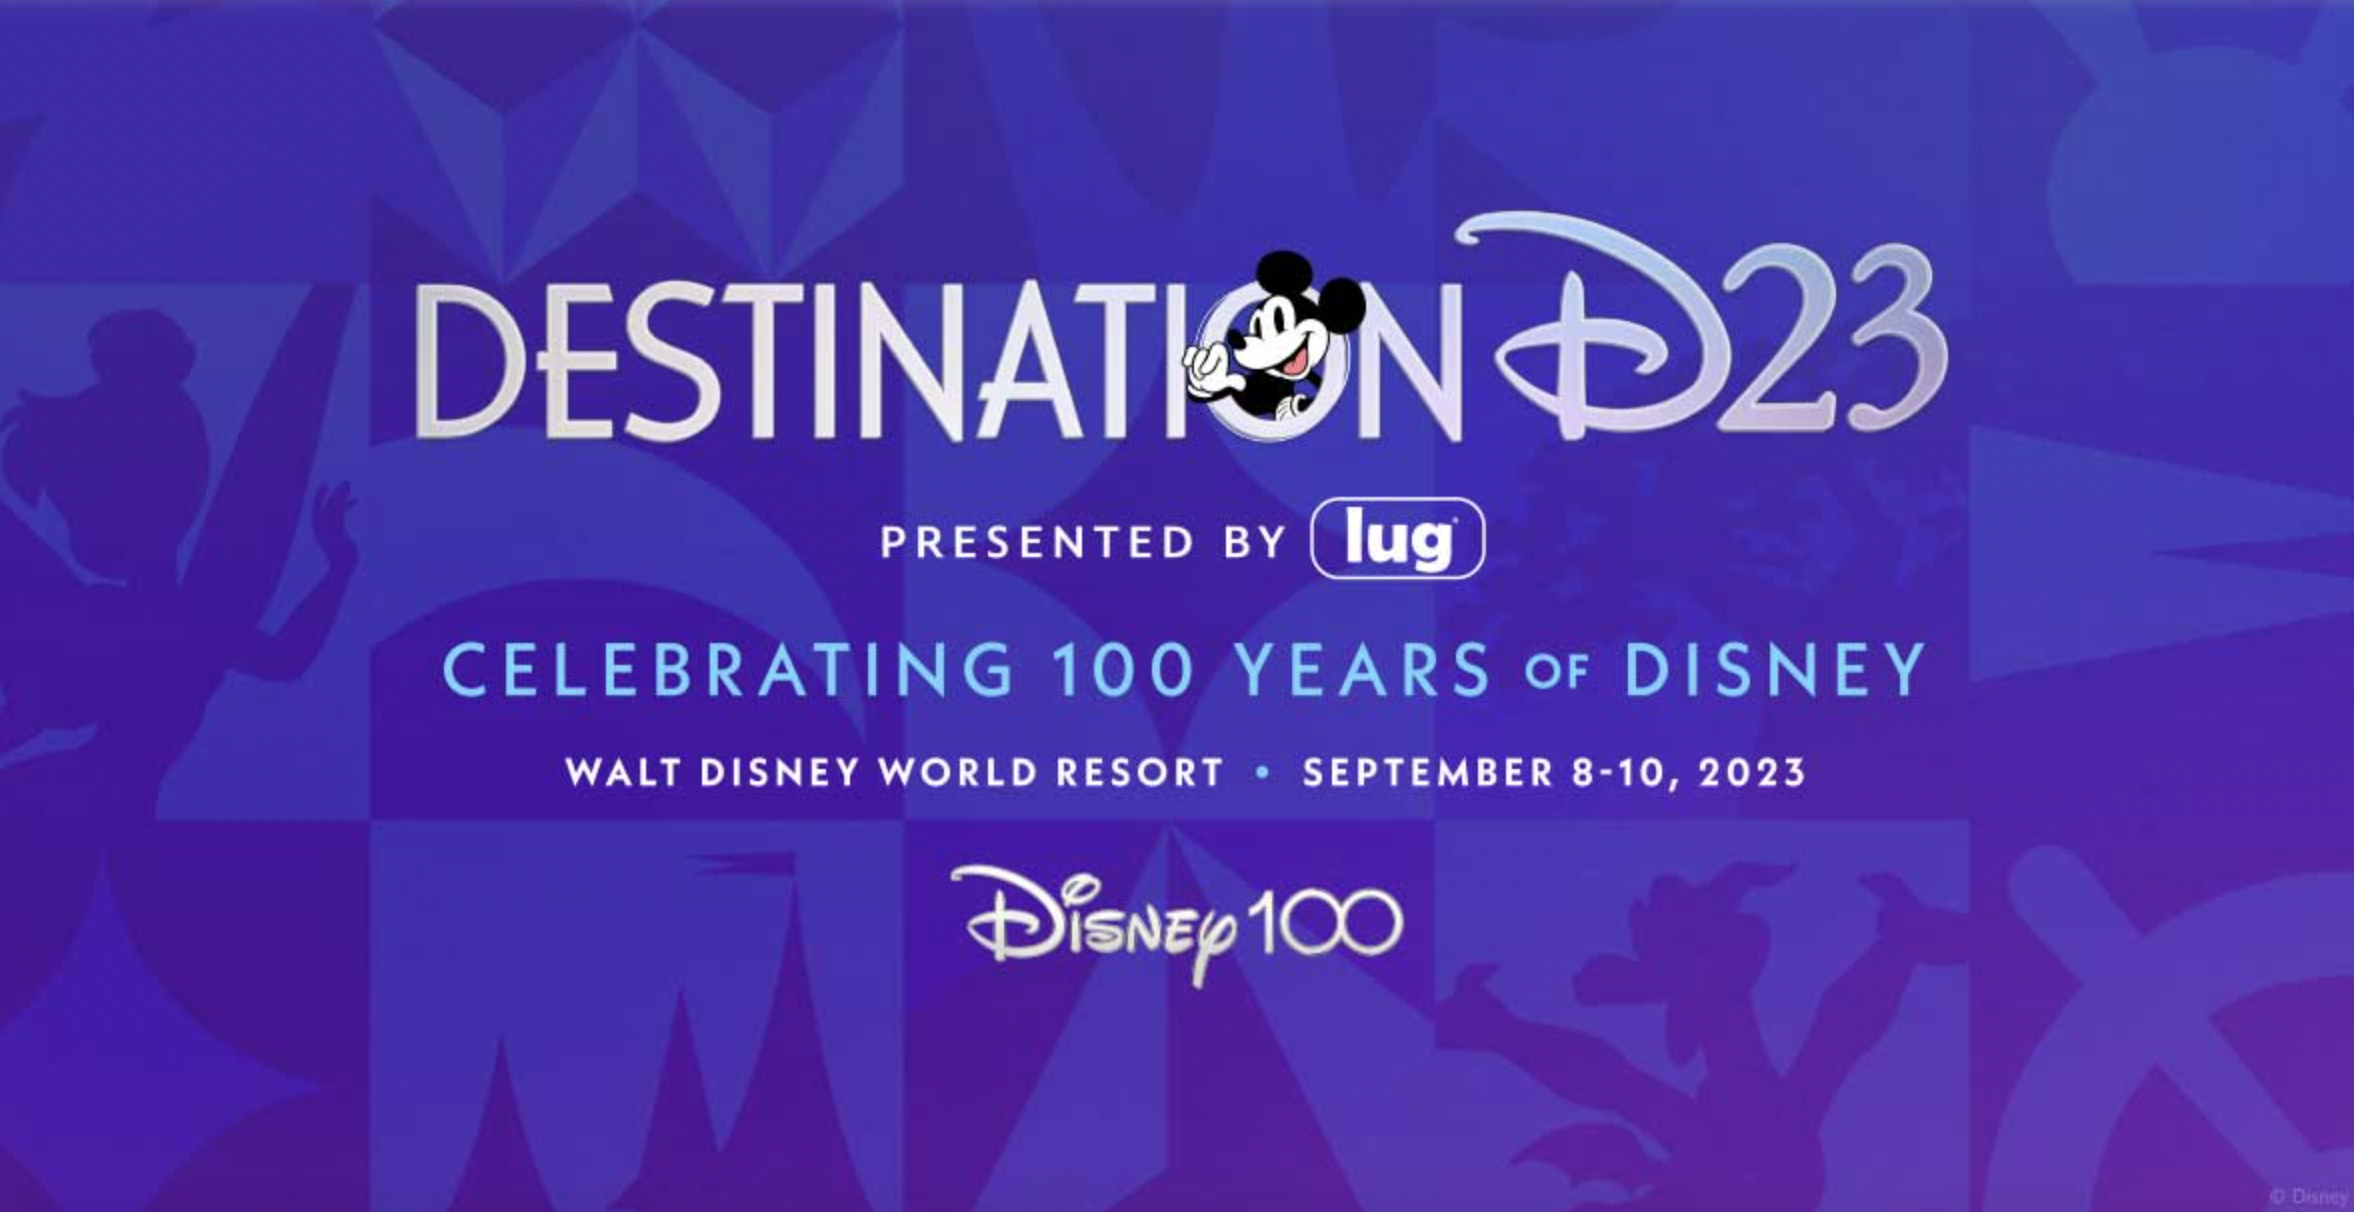 Disneyland Announces Two EXCLUSIVE Events This Spring - Inside the Magic